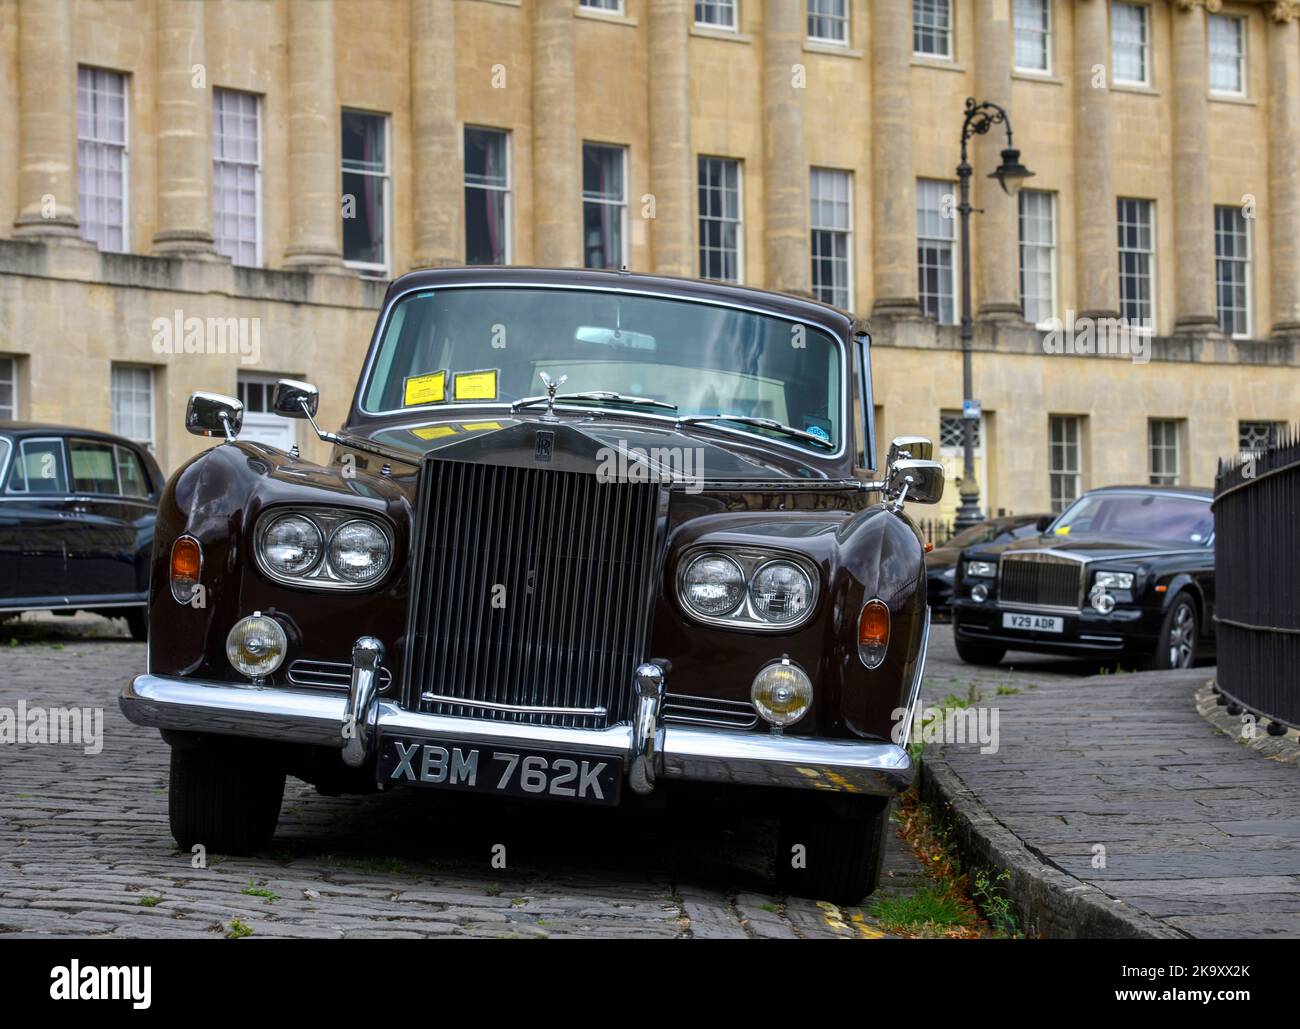 A 1972 Rolls-Royce Phantom VI Enclosed Limousine with two parking tickets in the Royal Crescent in Bath, UK Stock Photo